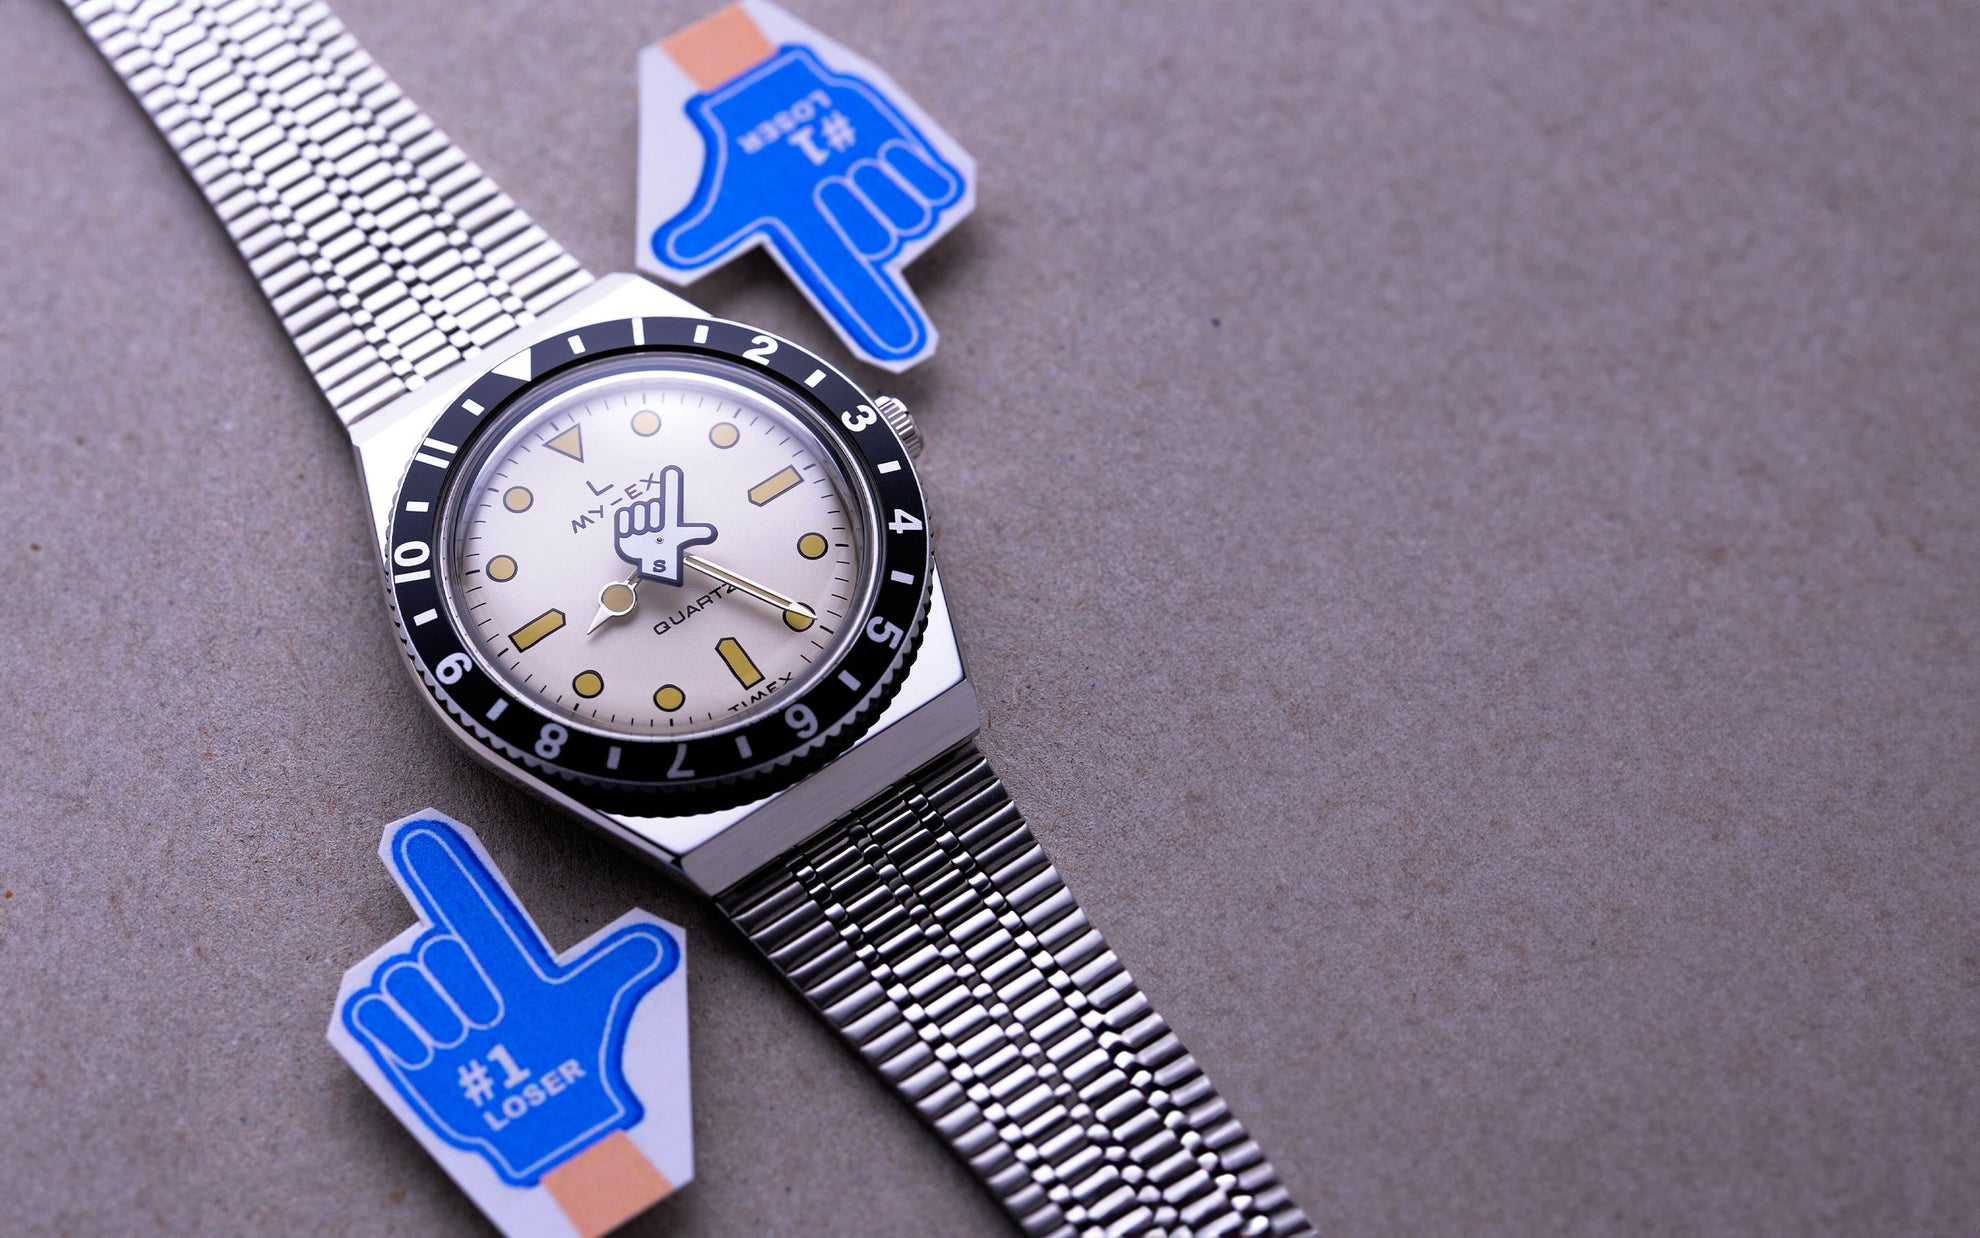 Silver seconde/seconde watch on a grey background with blue hand icons either side